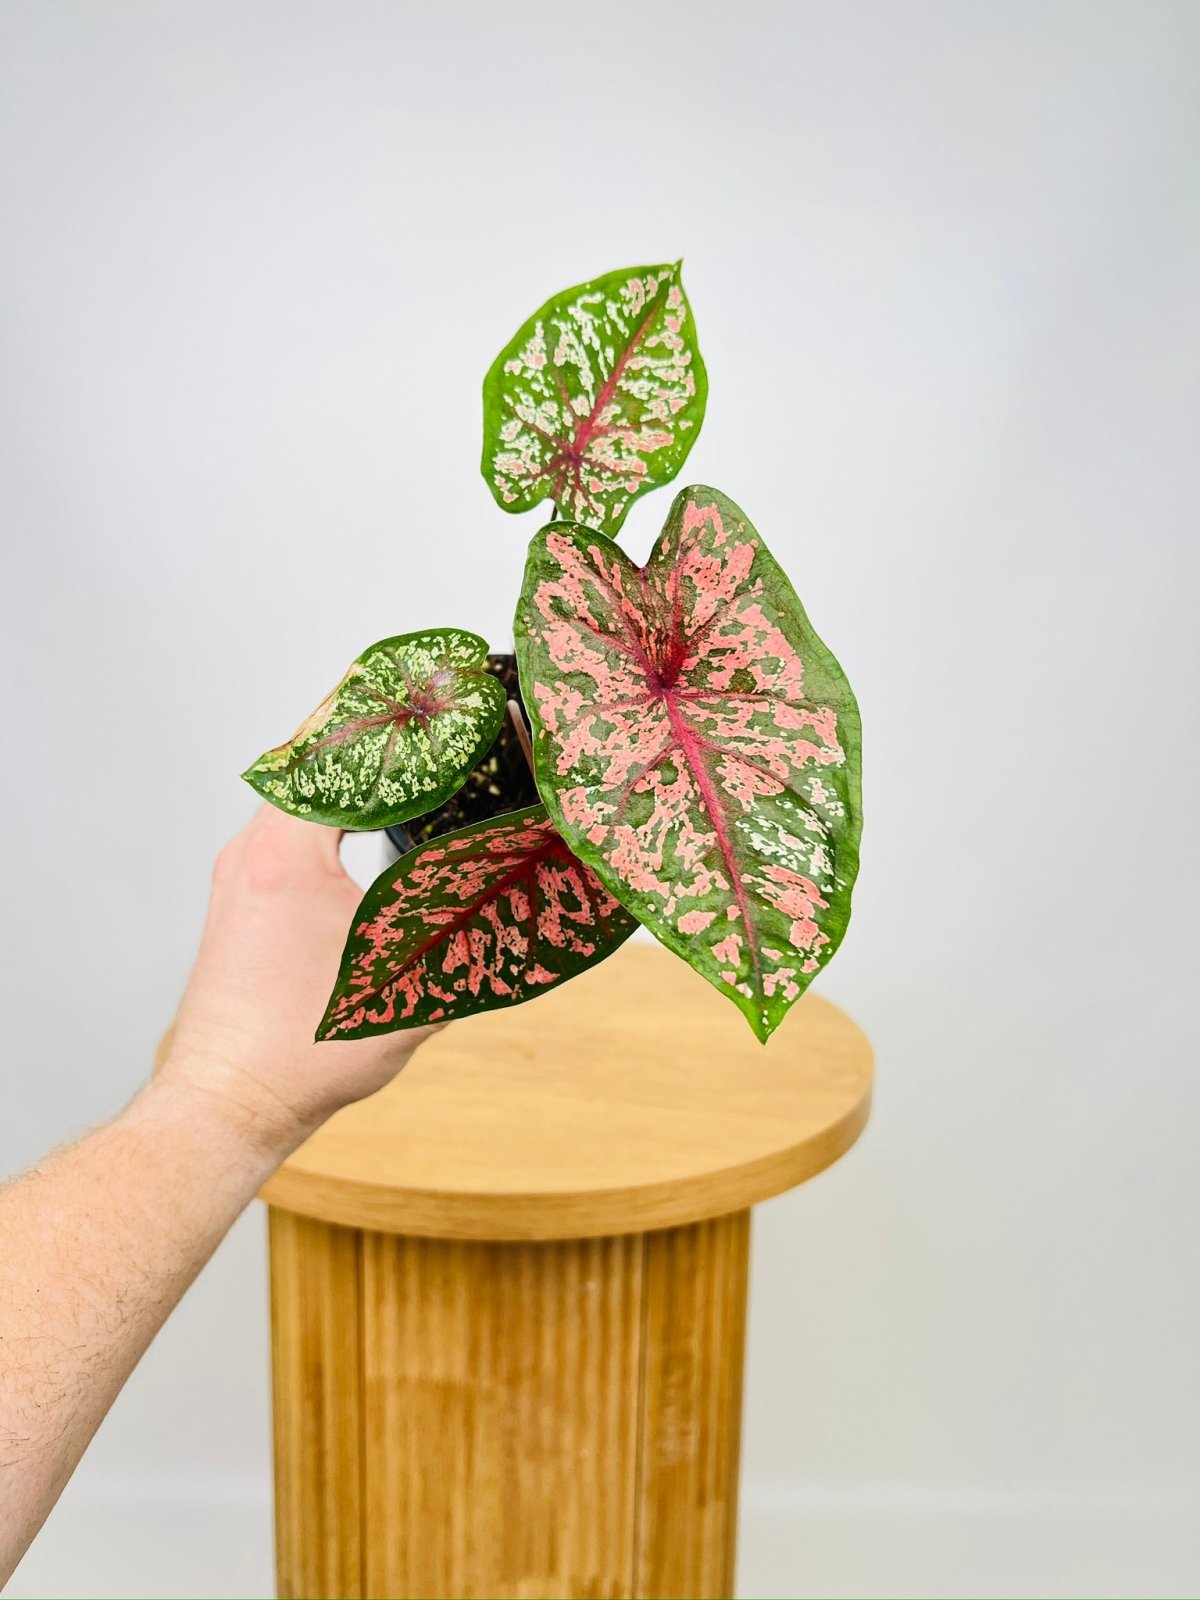 Caladium Bicolor - Pink Camouflage | Uprooted